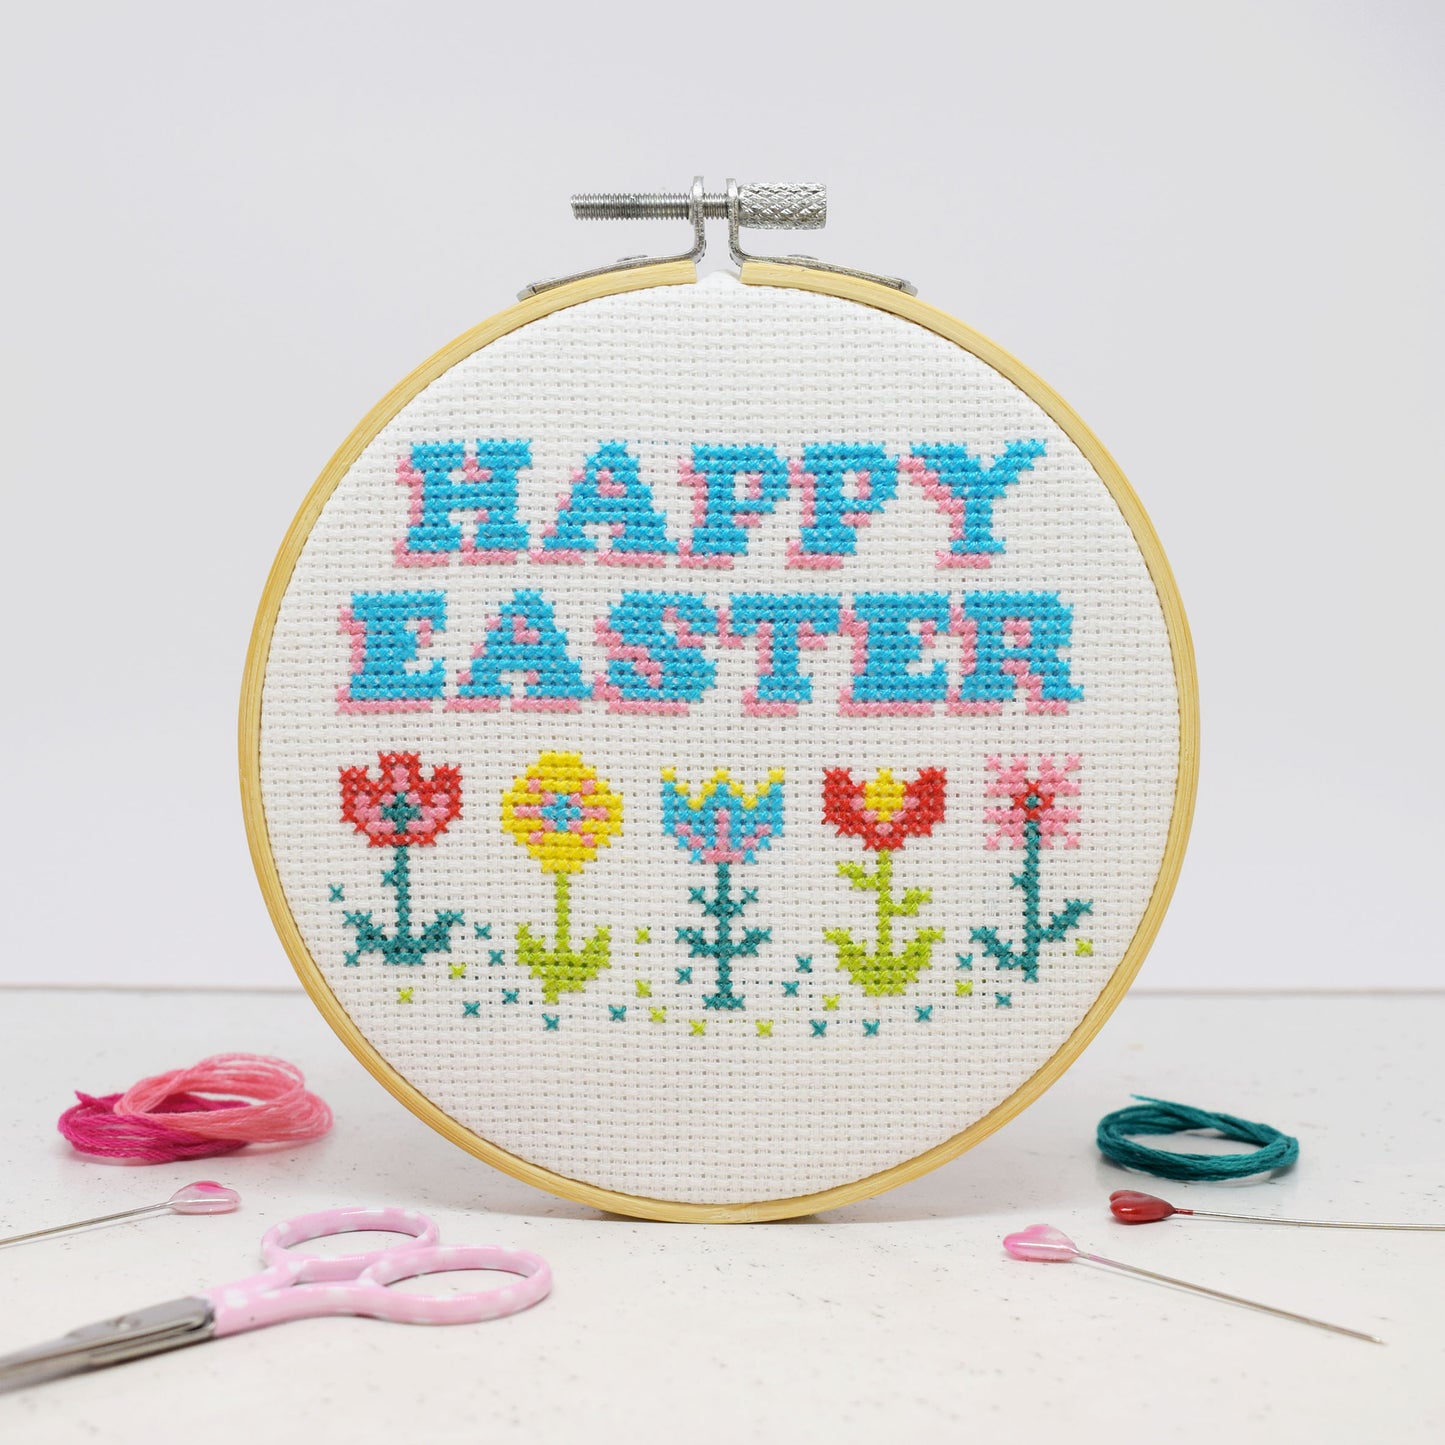 'HAPPY EASTER' Large Cross Stitch Craft Kit